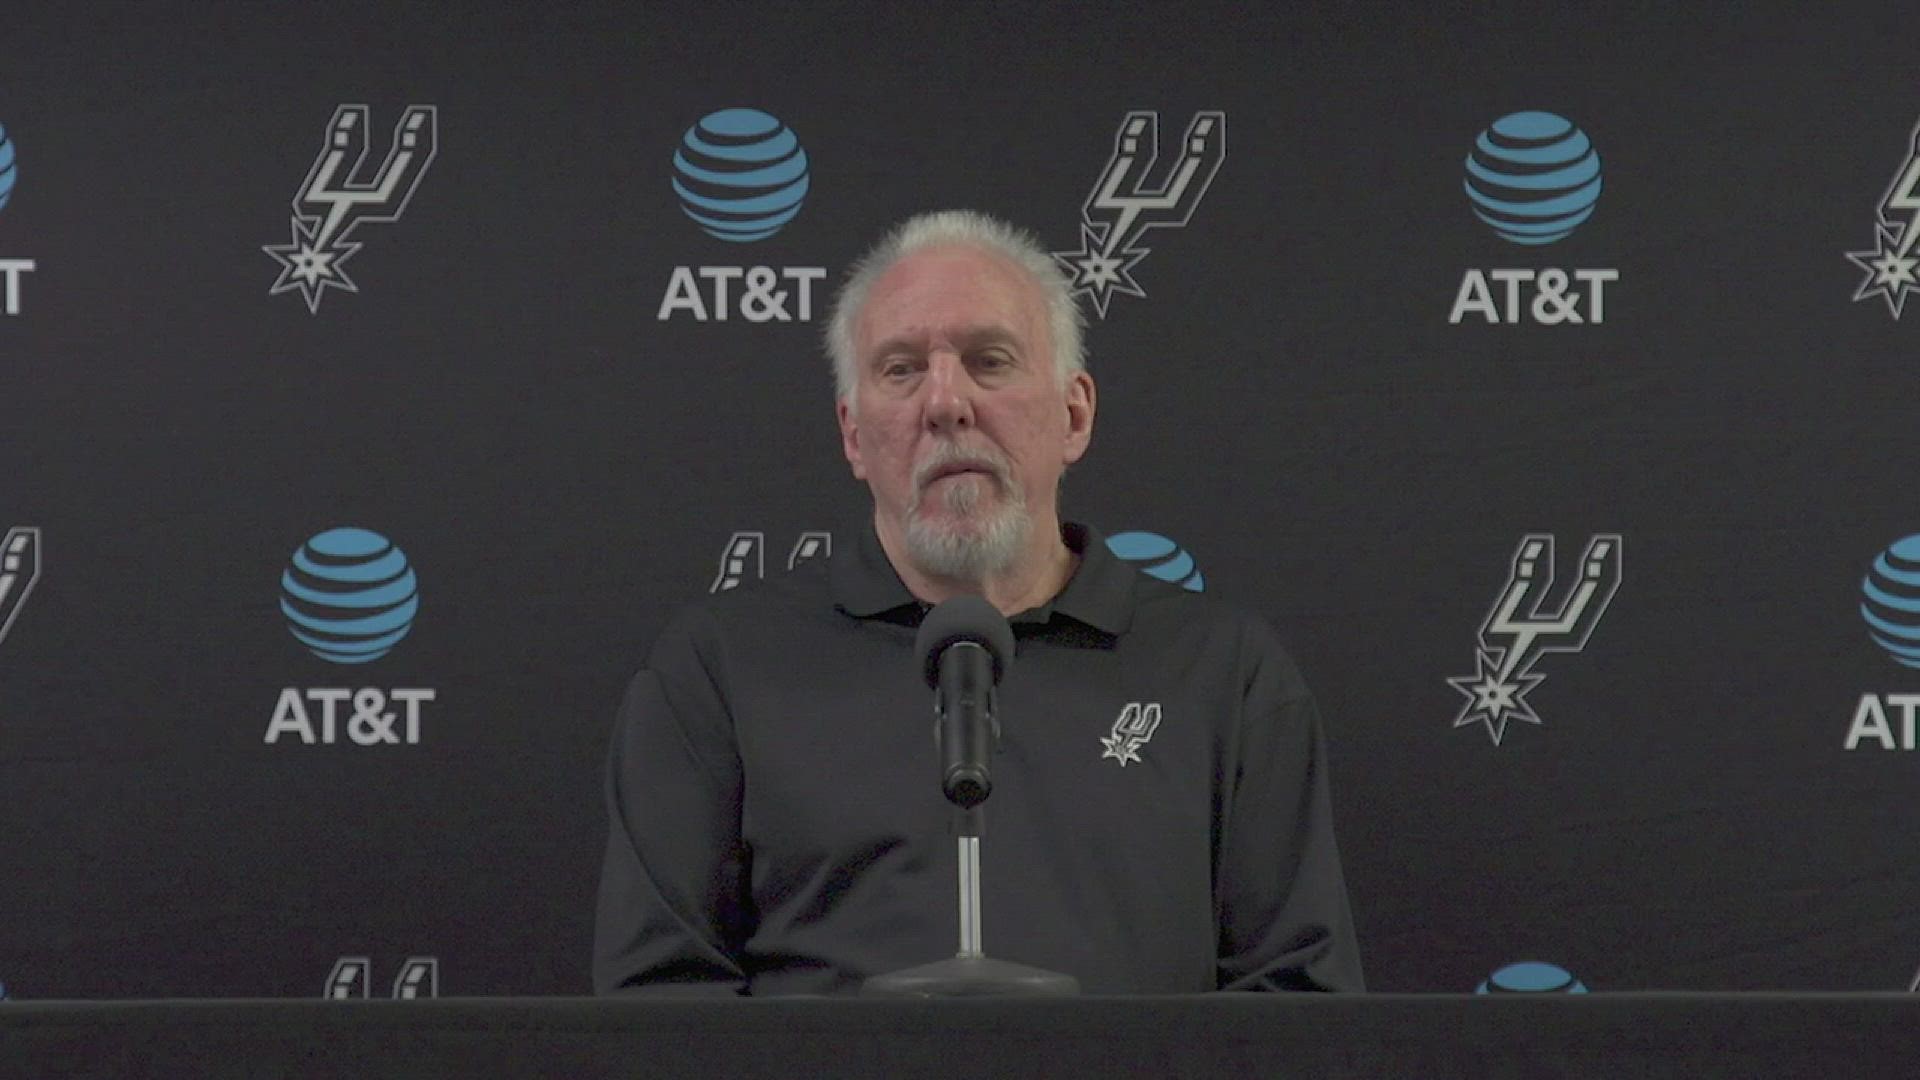 Popovich gave props to Jakob Poeltl, Tre Jones and Josh Richardson, and ignored his own historic milestone.